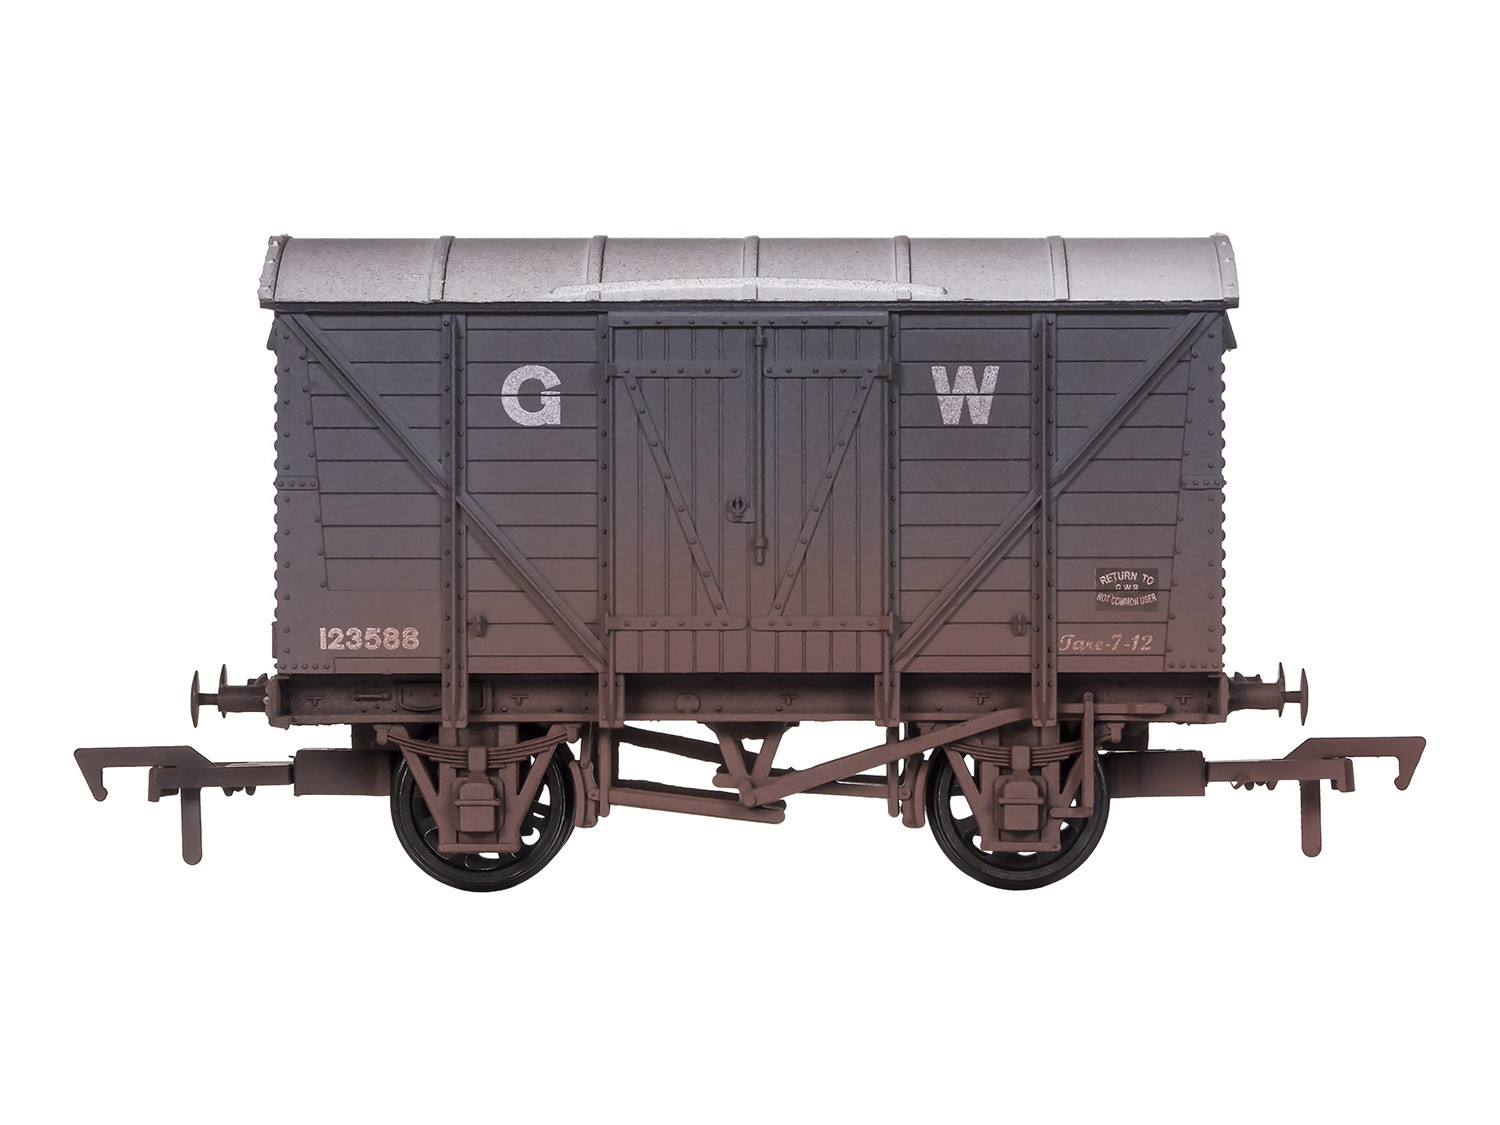 #D# Ventilated Van GWR 123588 Weathered